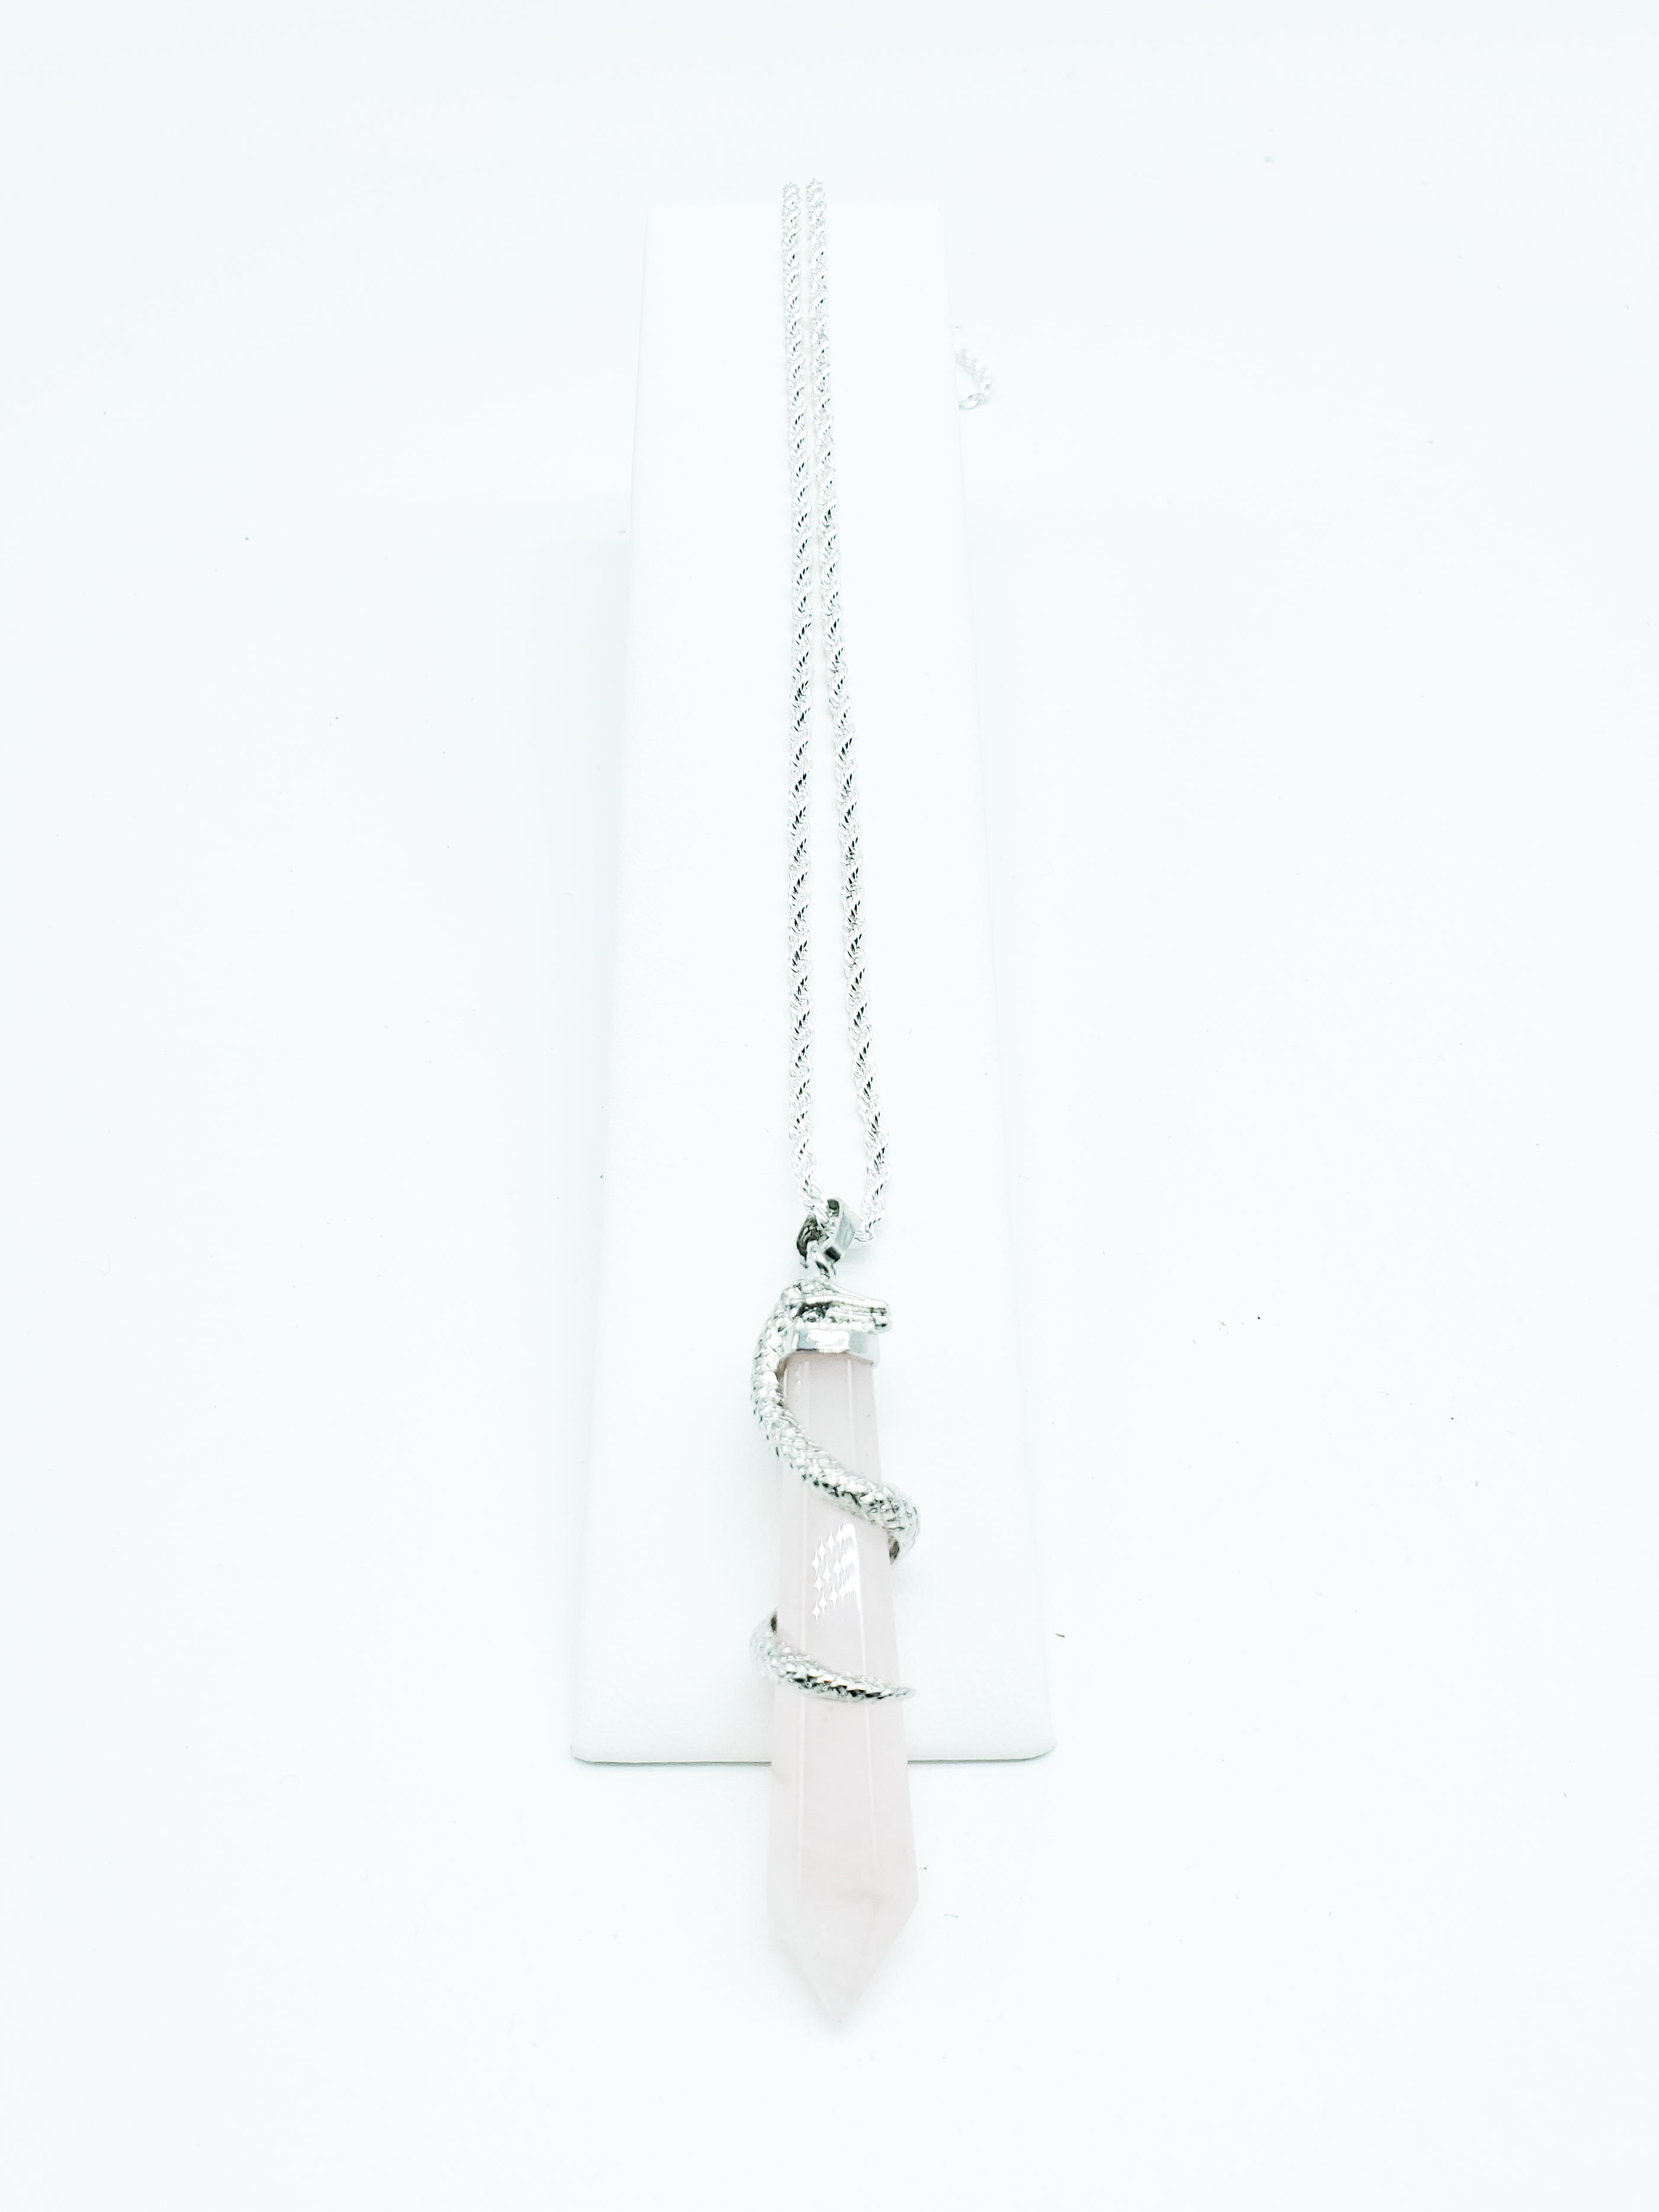 Rose Quartz Necklace with Silver Plated Snake on a Sterling Silver Rope Chain - The Caffeinated Raven